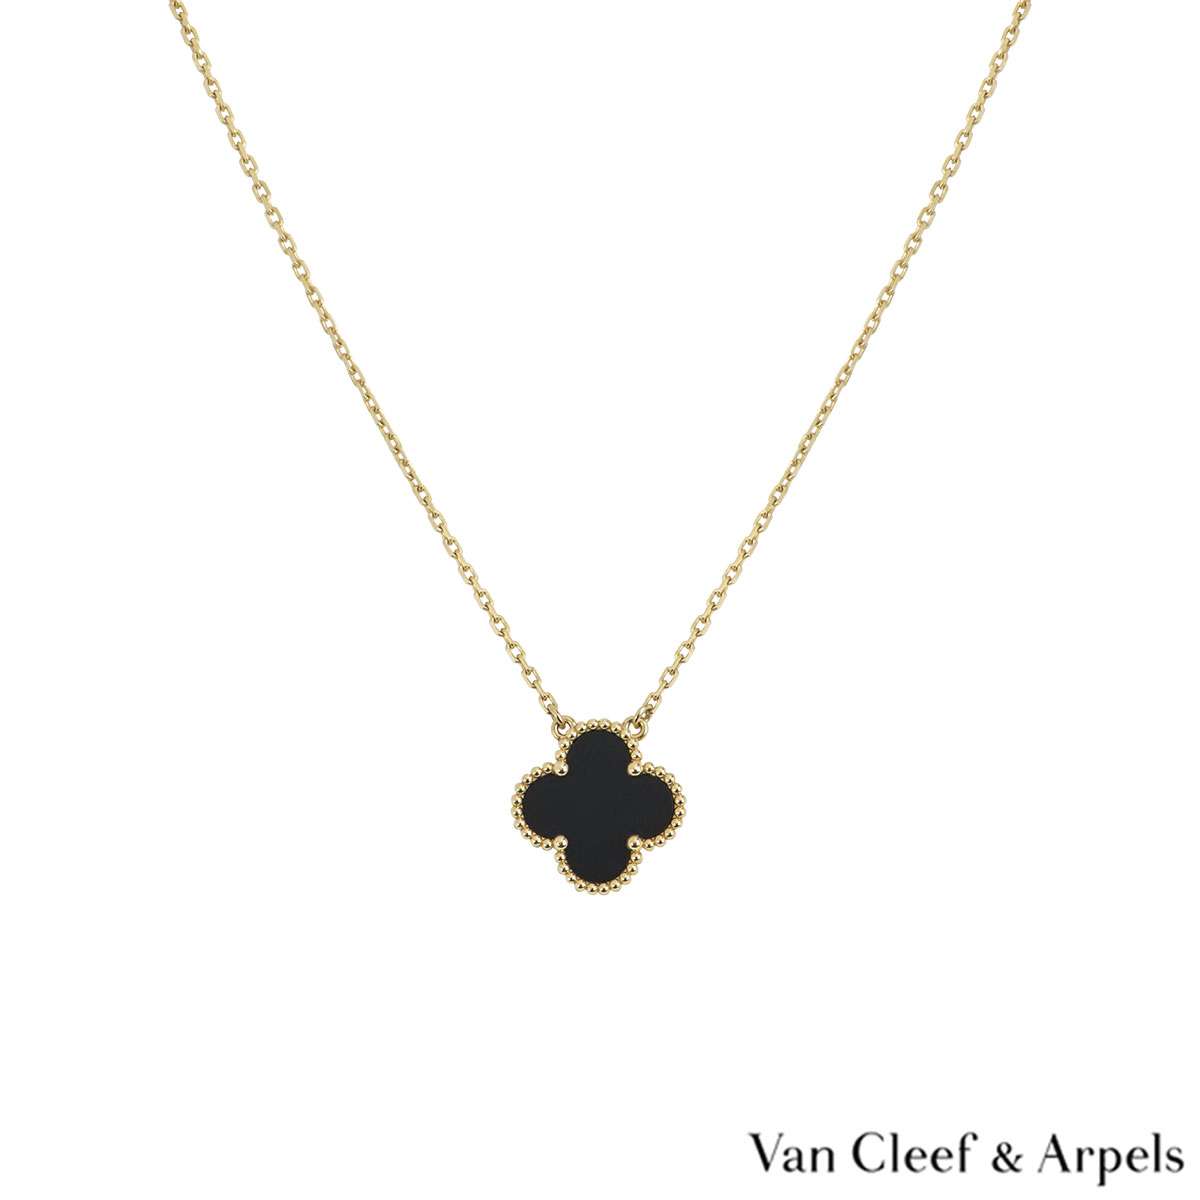 Van Cleef and Arpels Alhambra Necklace - Nelson Coleman Jewelers